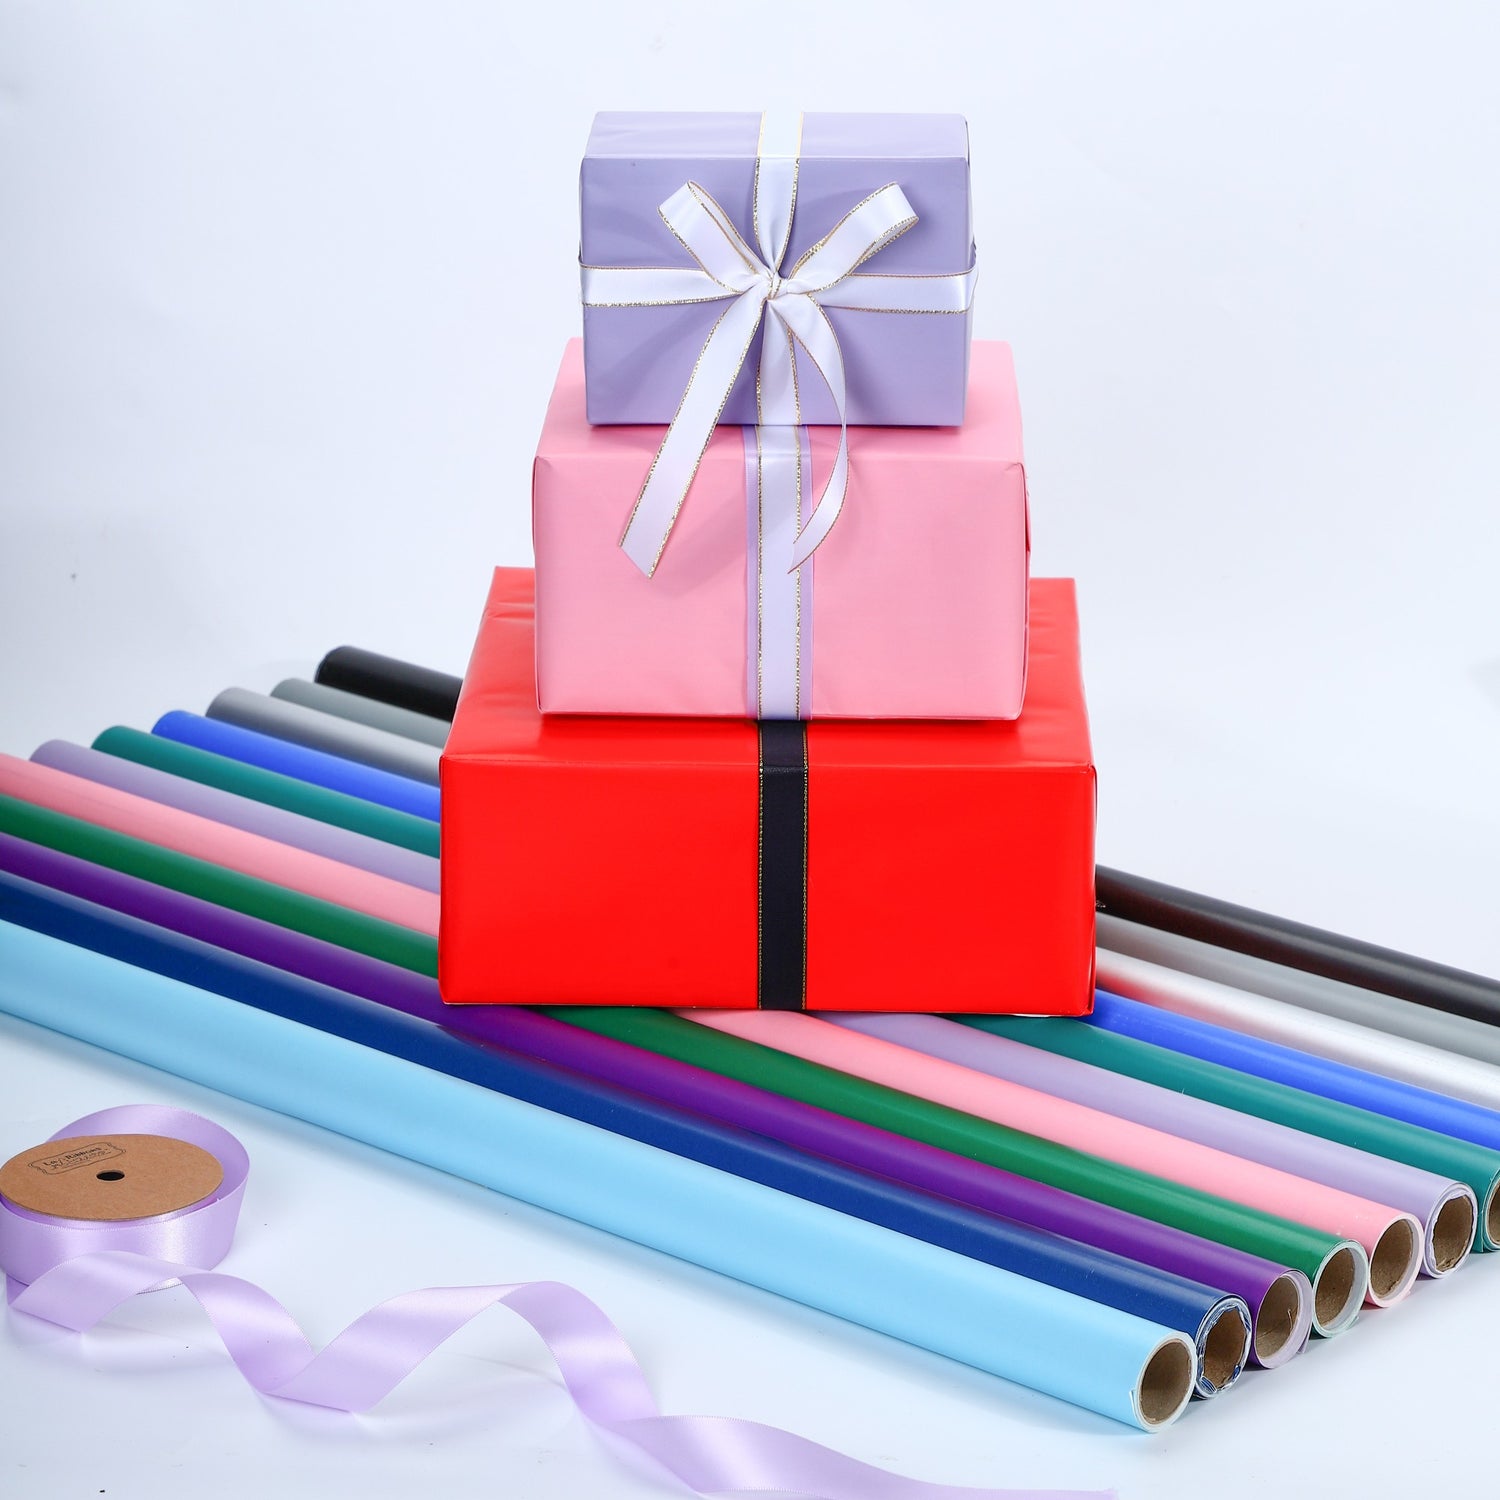 Wholesale wrapping paper, bags, boxes, tissue, cards